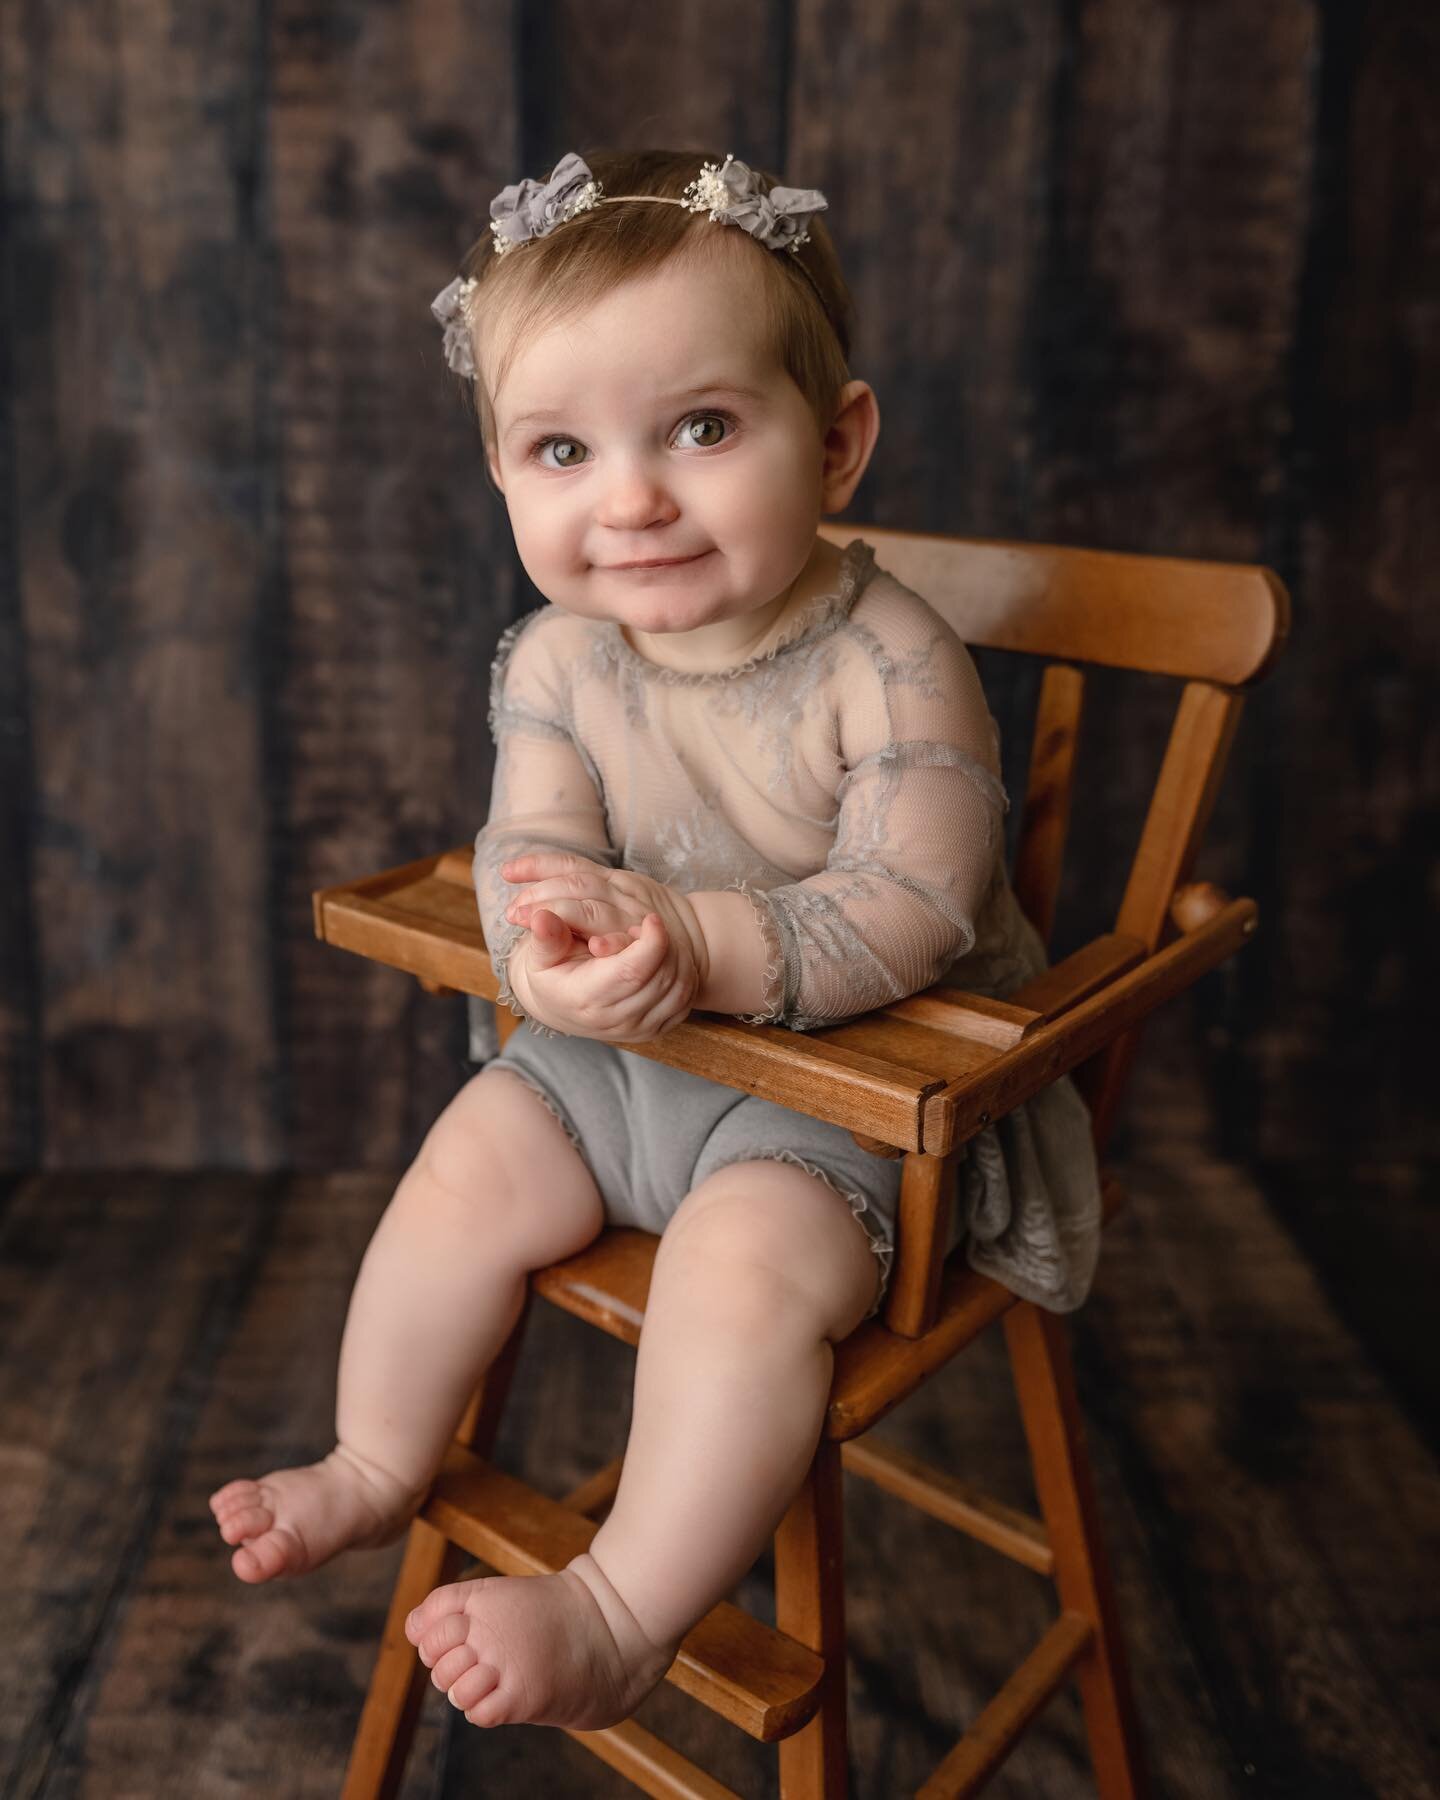 I found this adorable chair while thrift shopping. It was a great addition to my props. 😃 Book your baby&rsquo;s session today! .
.
.
.
.
#baby#babyportraits#milestonephotography#babyphotographer 
#westpalmbeachnewbornphotographer
#wellingtonbabypho